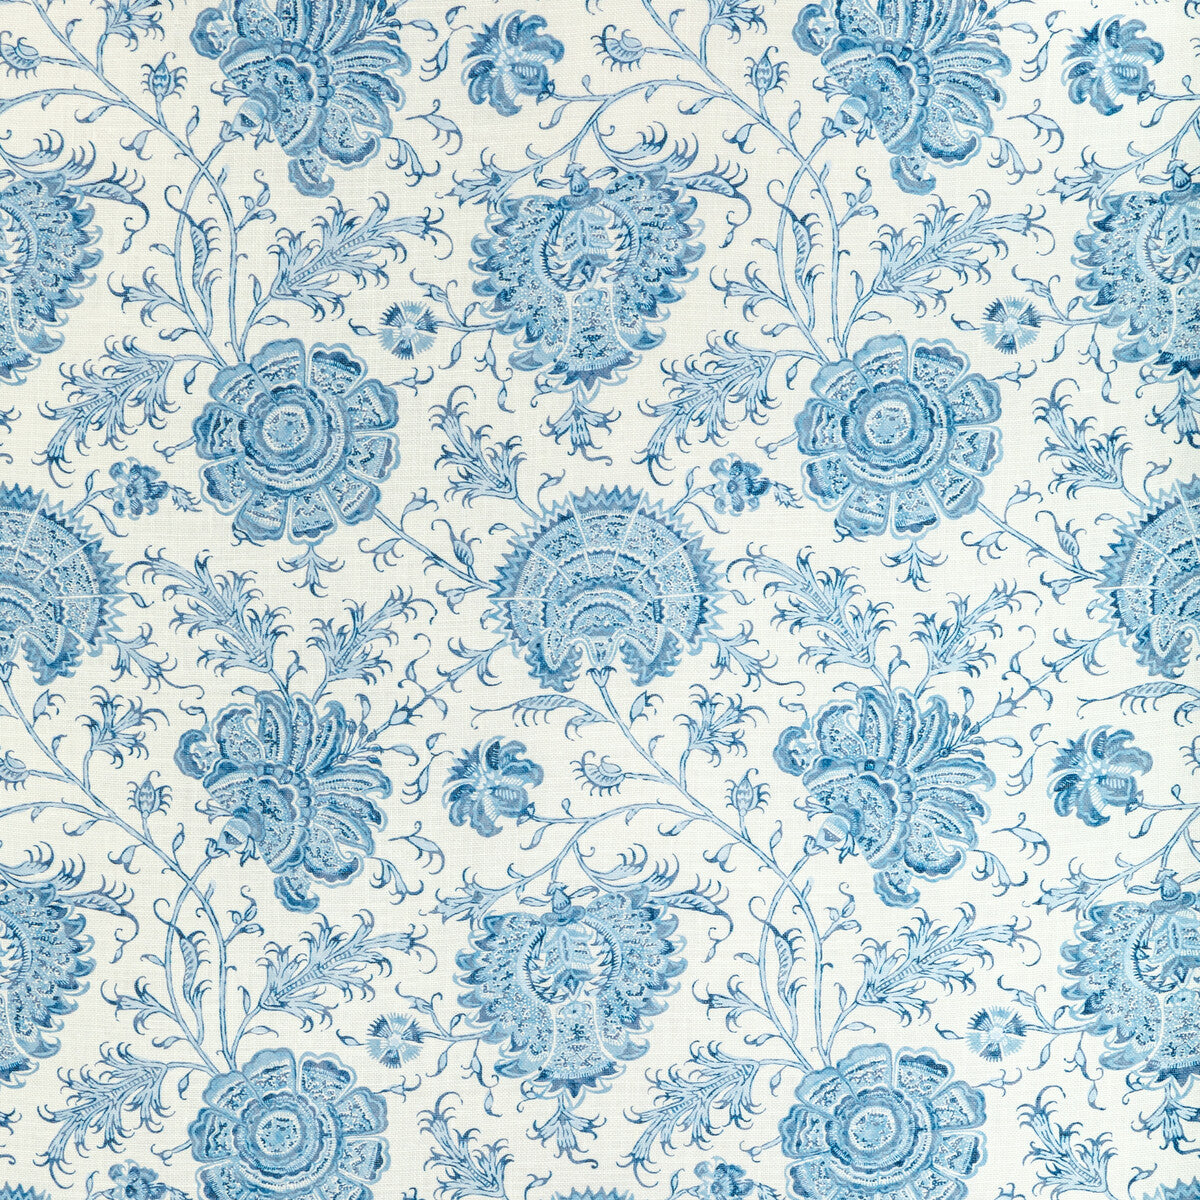 Indiennes Floral fabric in delft color - pattern 2022108.5.0 - by Lee Jofa in the Sarah Bartholomew collection